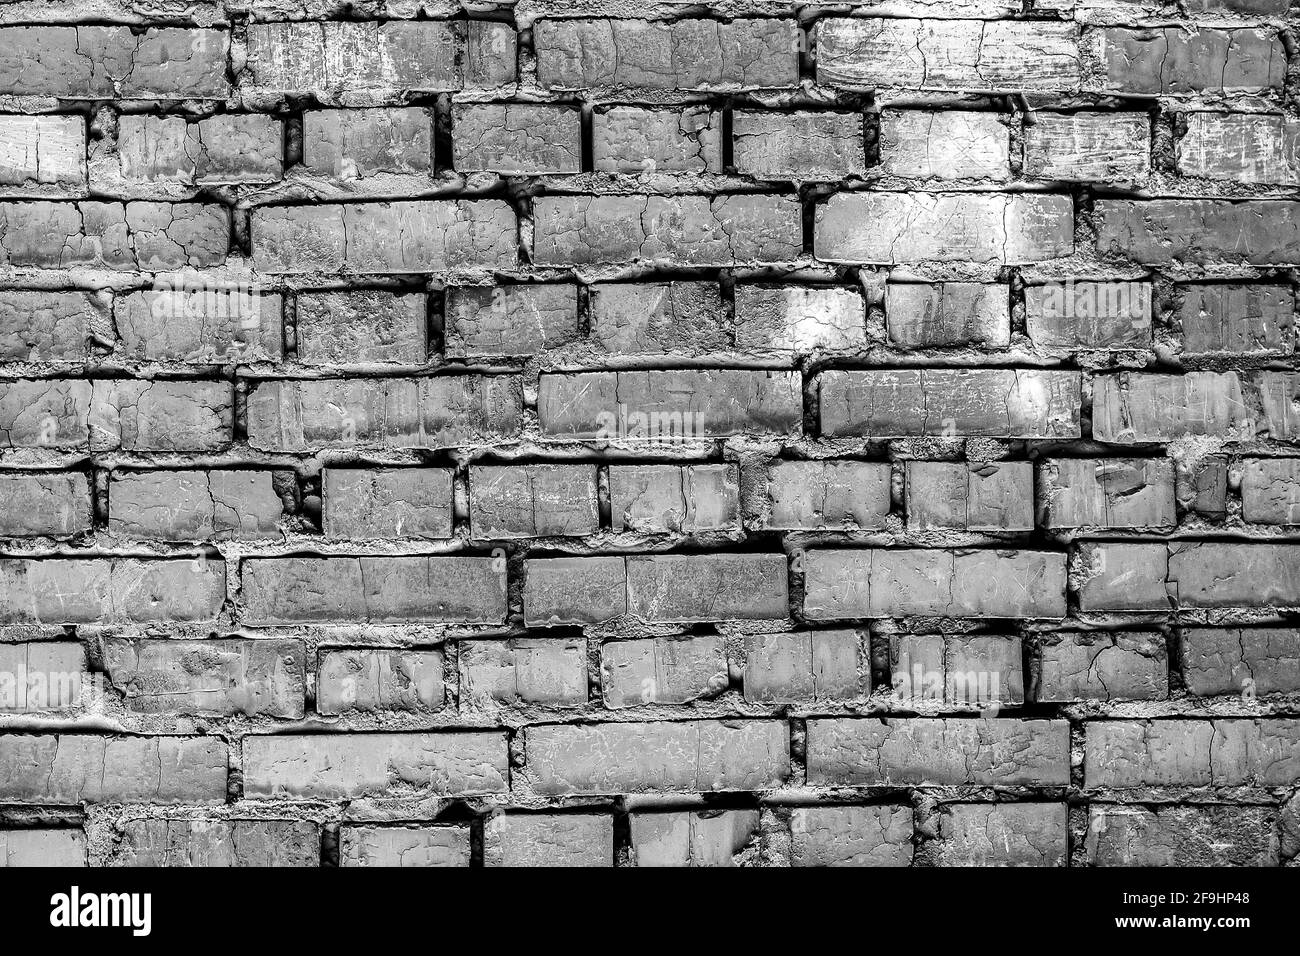 Brickwork in grayscale. Texture of an old brick wall. Stock Photo